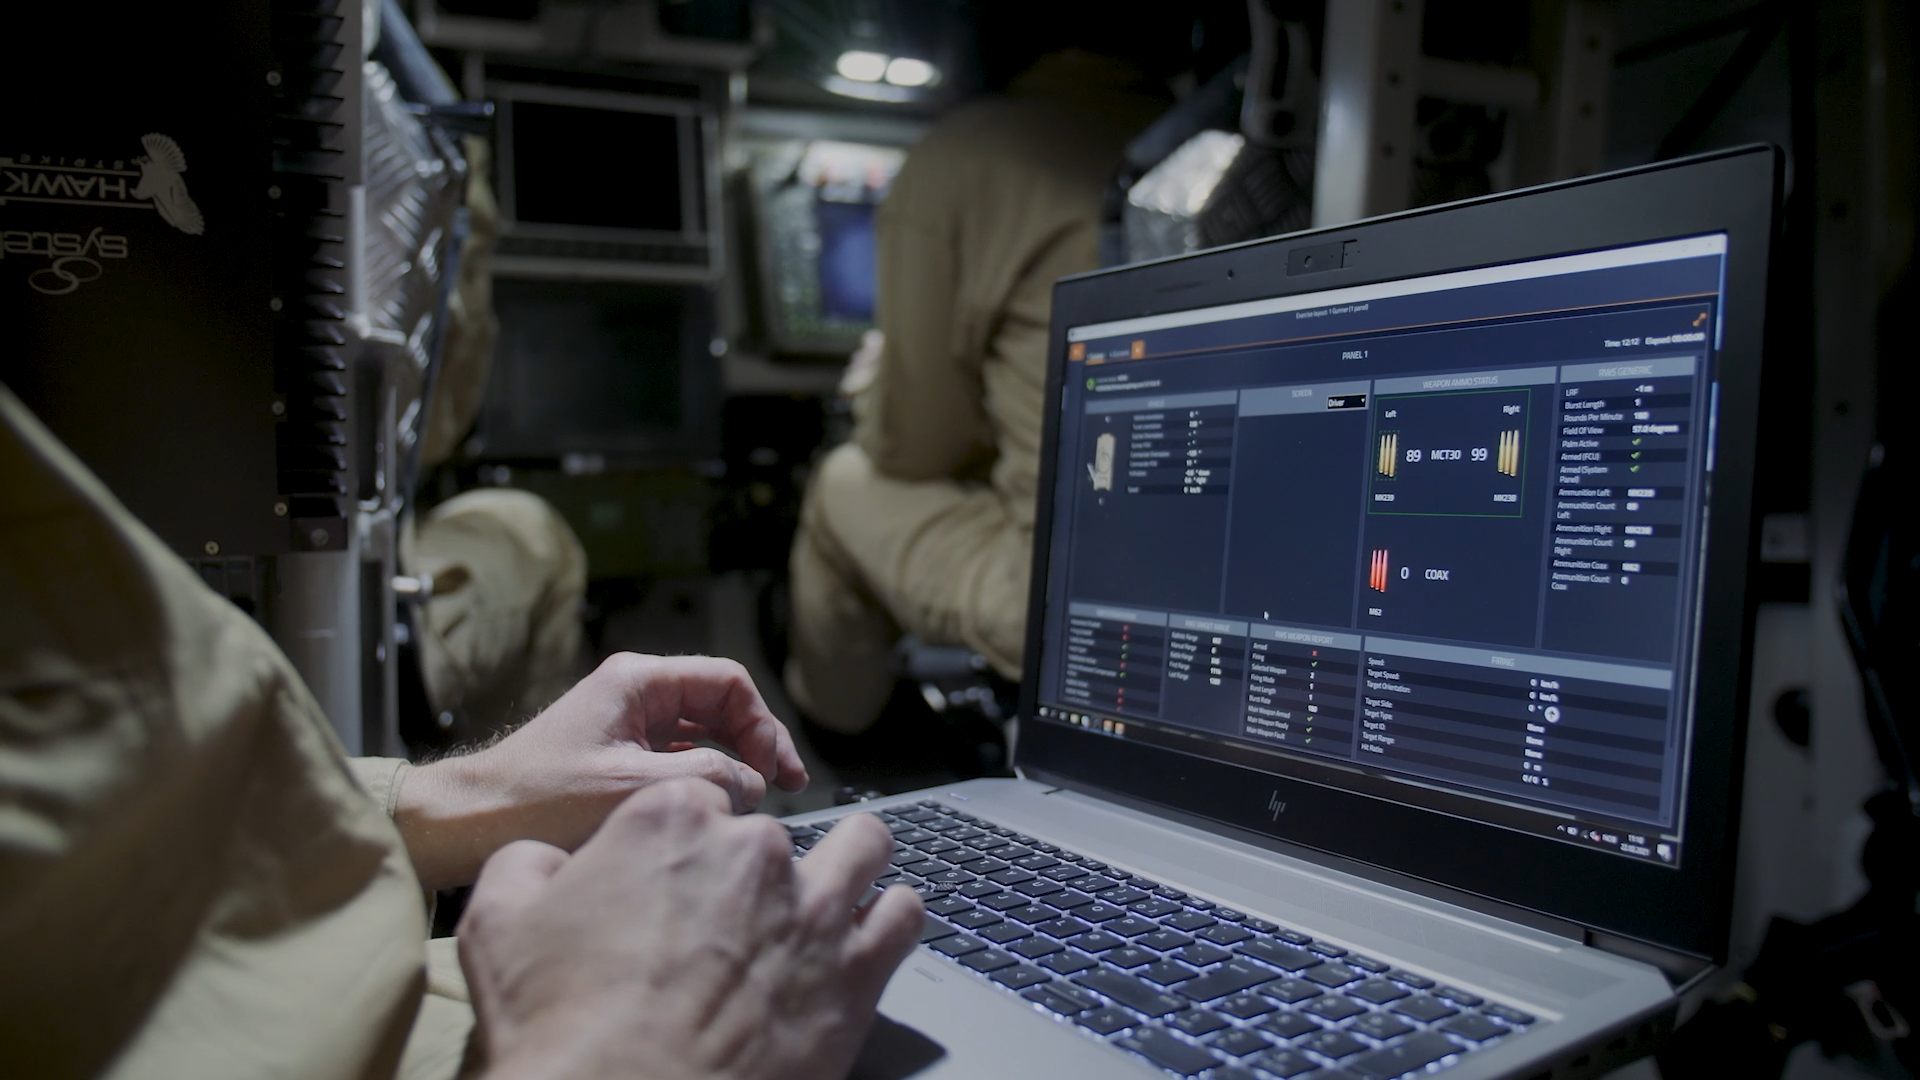 The KONGSBERG CORE Simulation System features an instructor operator station developed by BISim to allow instructors to monitor multiple trainees, observing operator system interactions during the live training sessions.